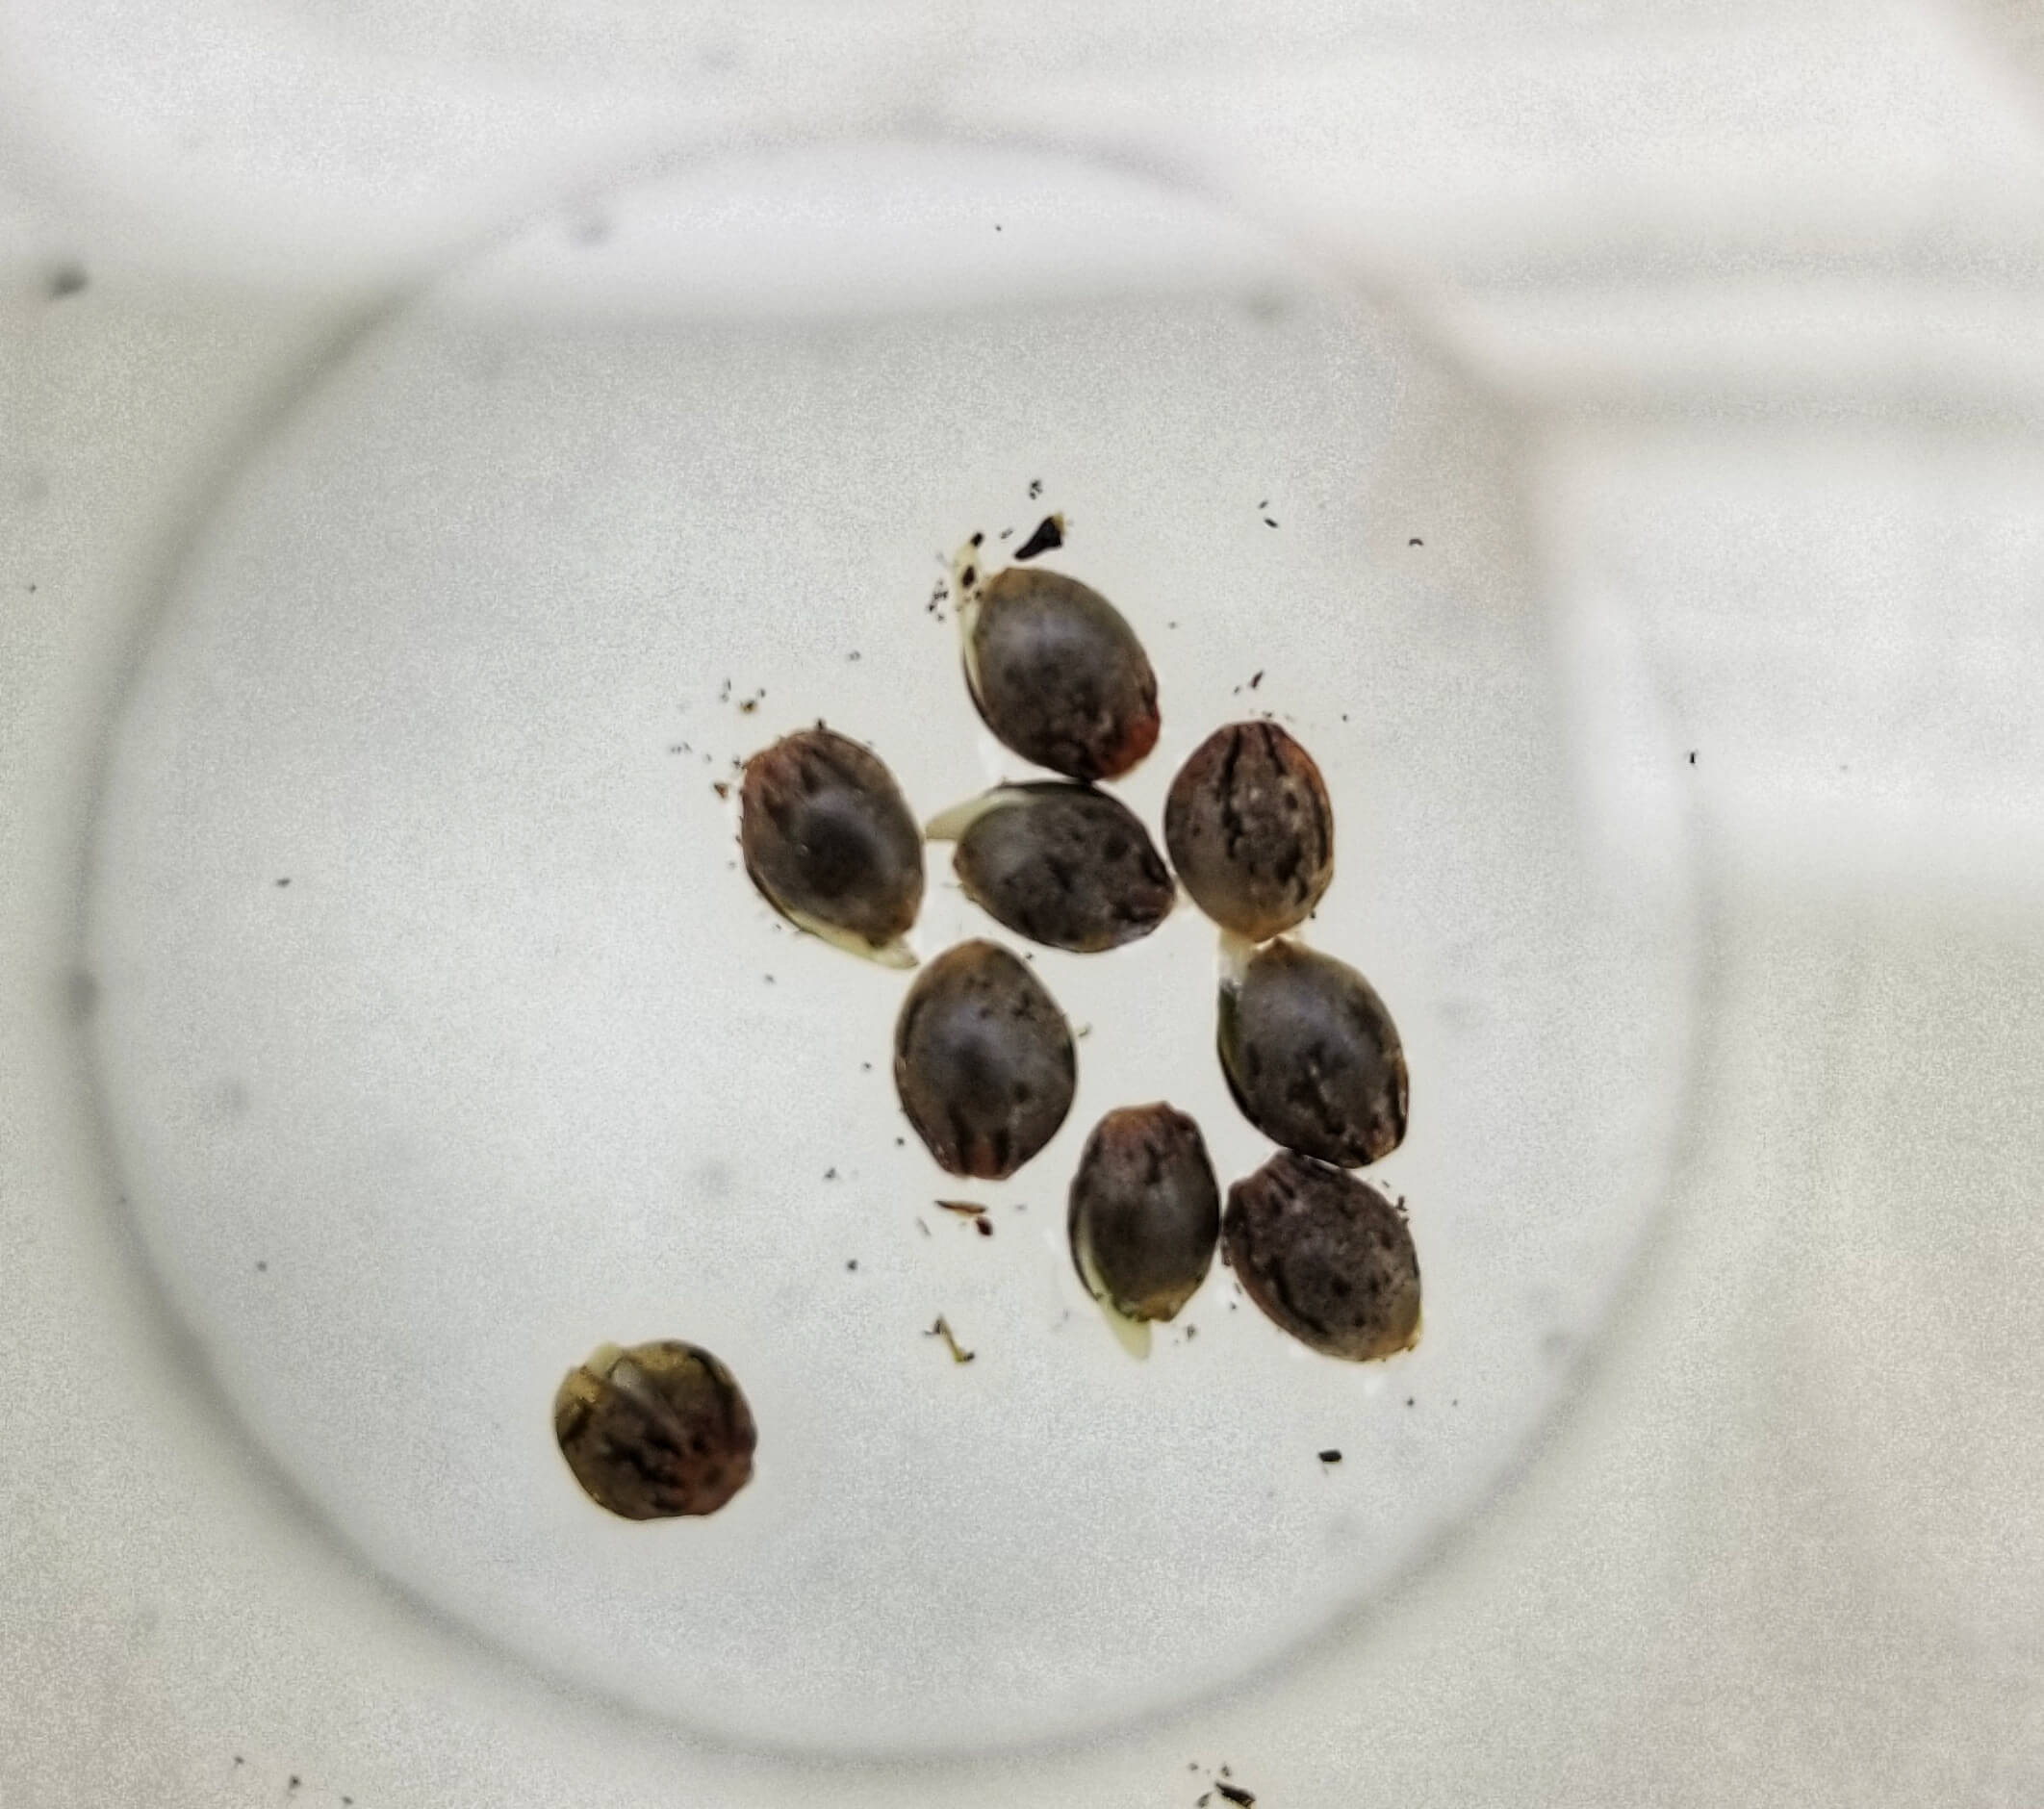 Cannabis Seeds Floating In Water